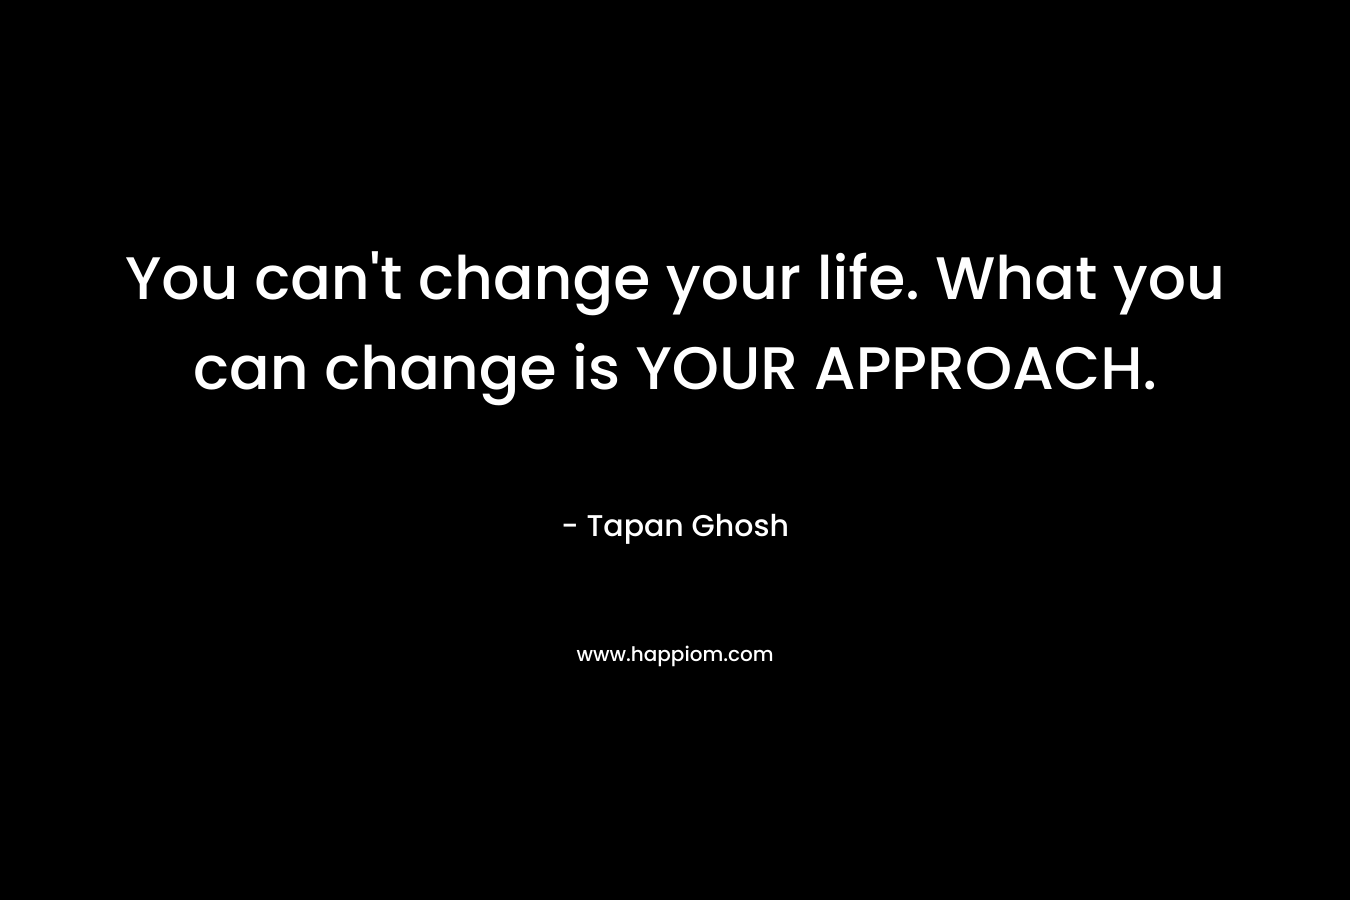 You can't change your life. What you can change is YOUR APPROACH.